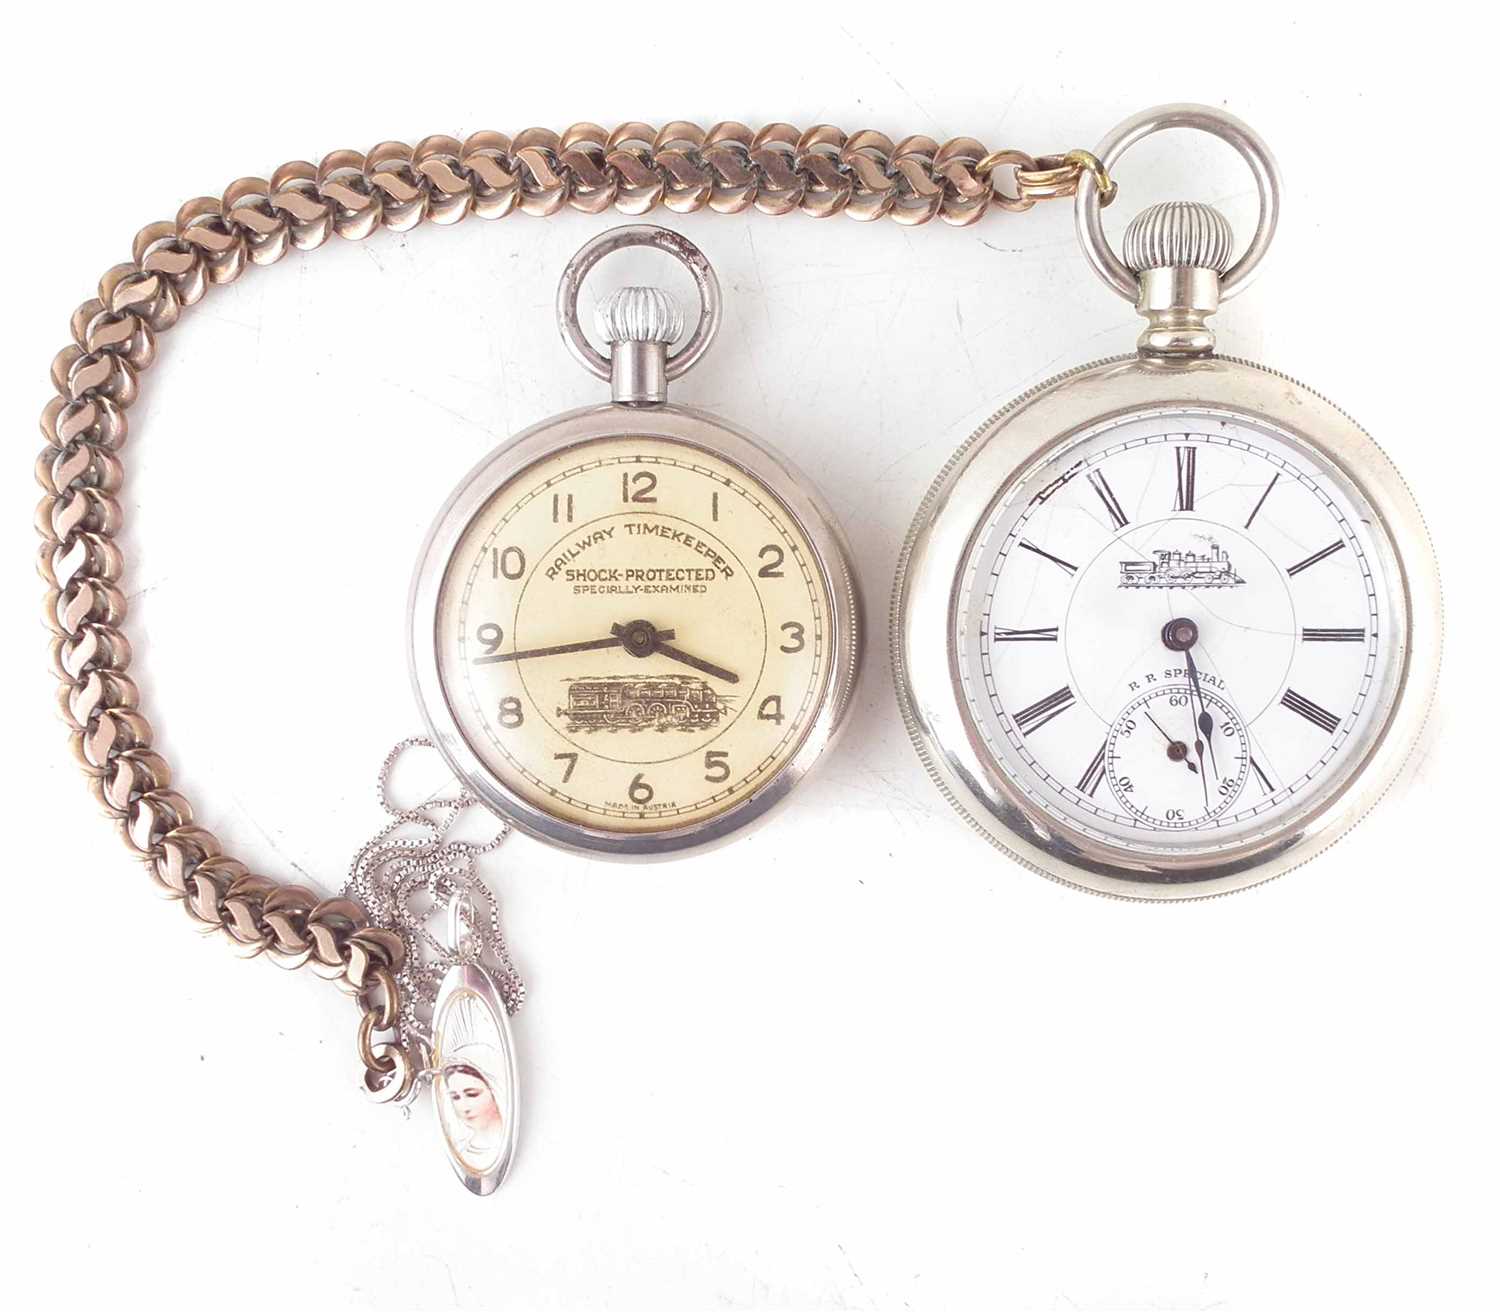 Lot 188 - Railway timekeeper pocket watch (Made in Austria) and Morain Watch Co.., RR special pocket watch, Swiss made